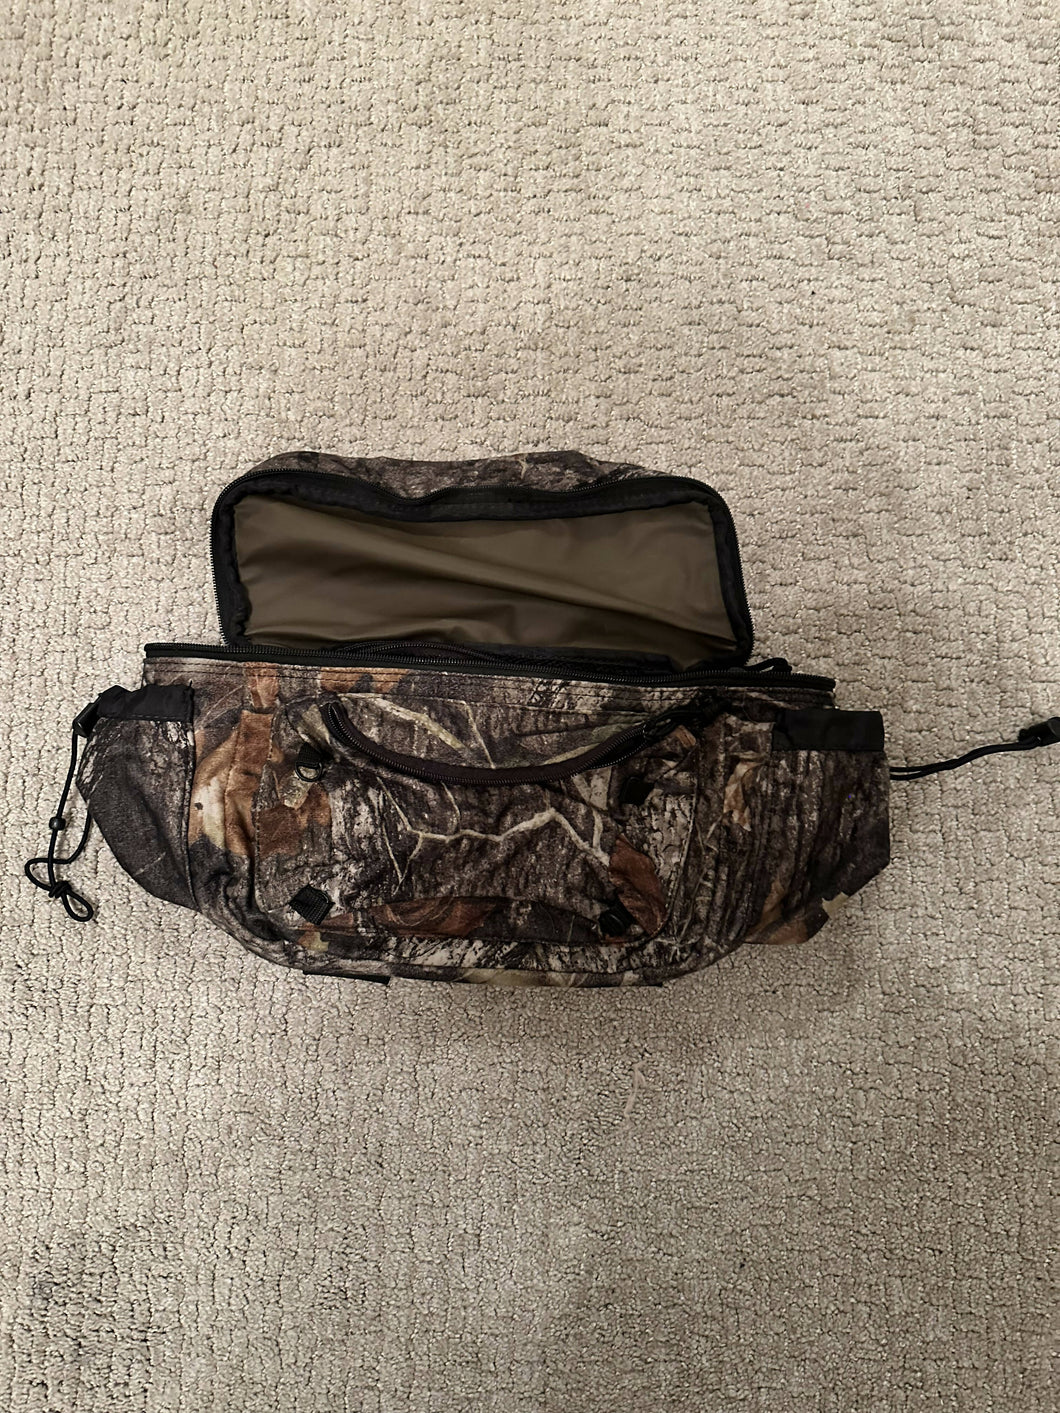 Mossy Oak Shadow Grass Blades Camo Tote Bag Lightweight Medium Reusable  Grocery Shopping Cloth Bags Suitable for DIY 15 x 16 inches - Walmart.com